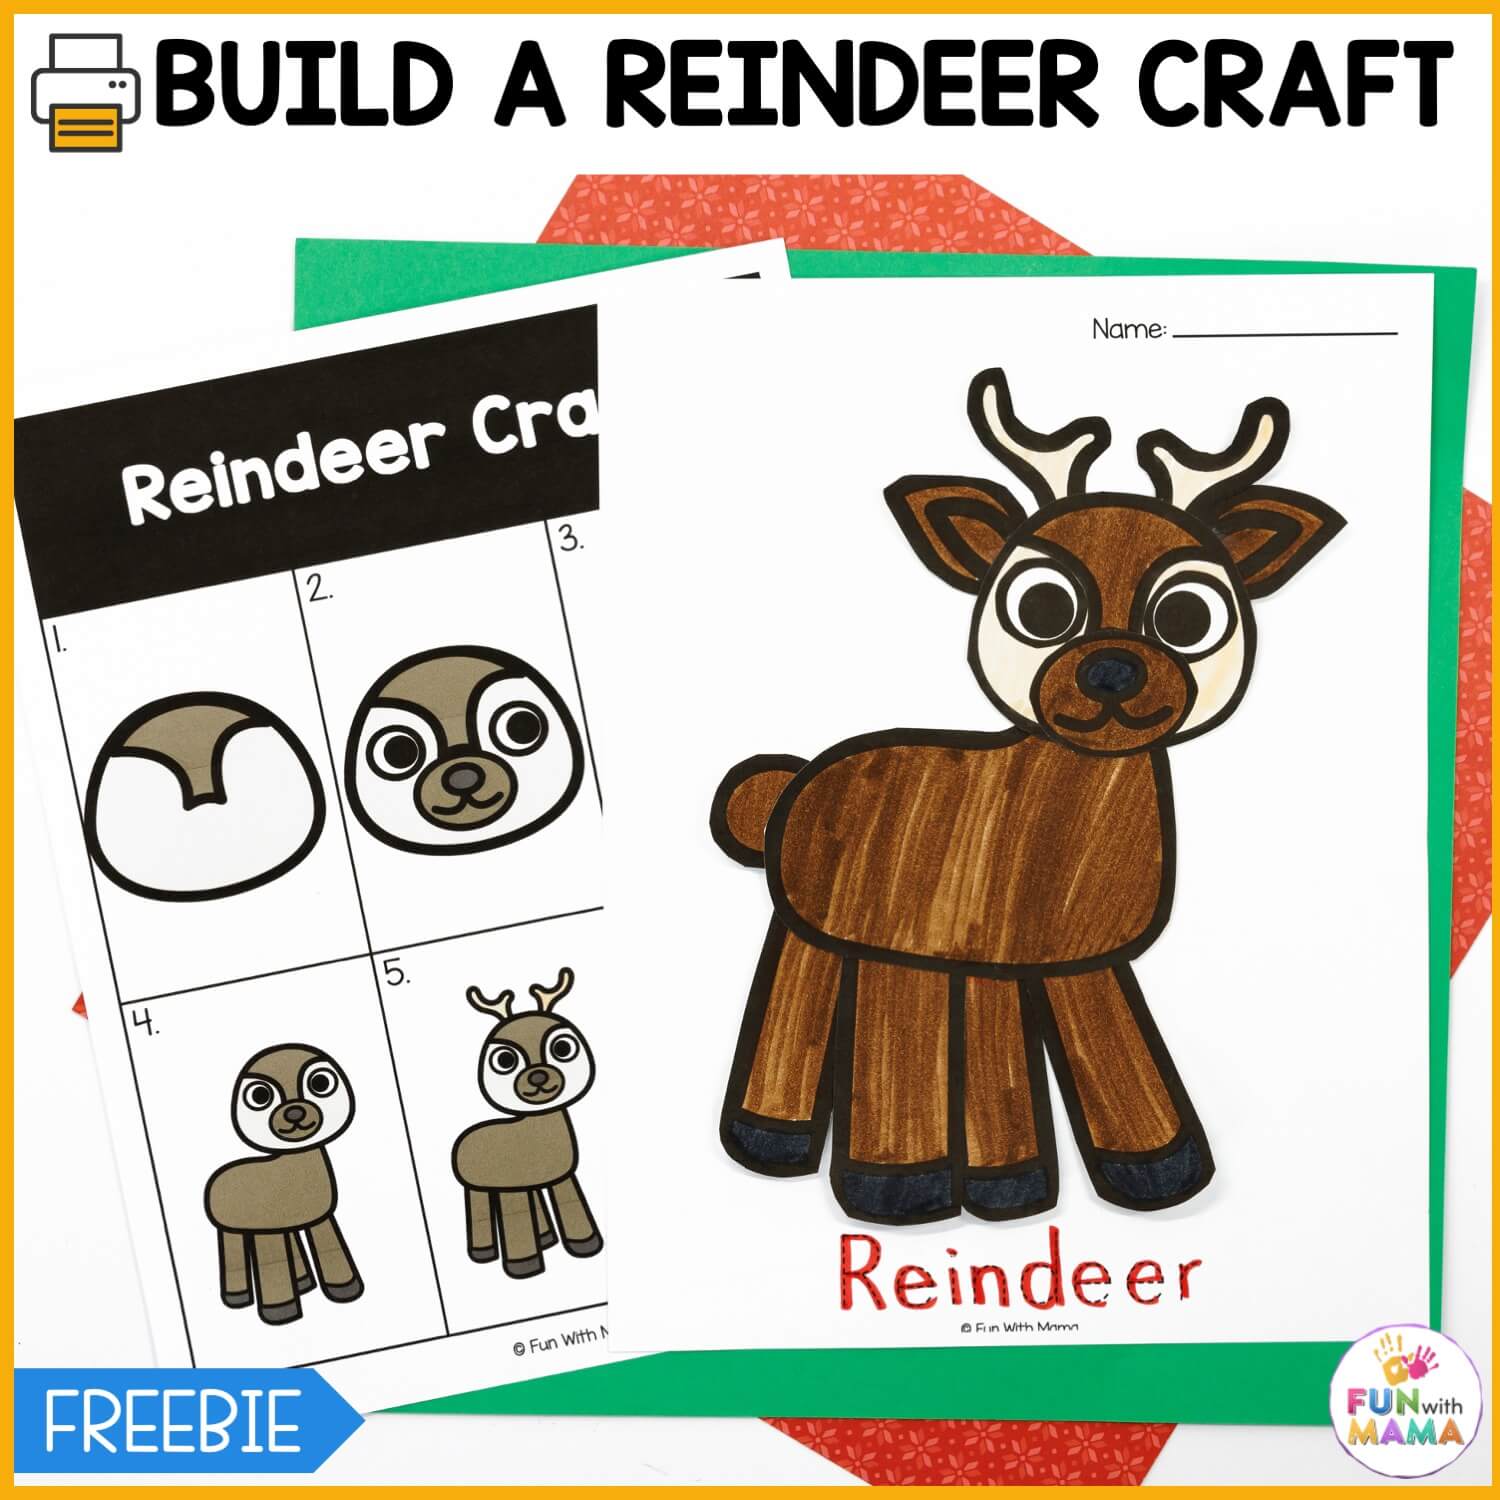 build-a-reindeer-craft-cover